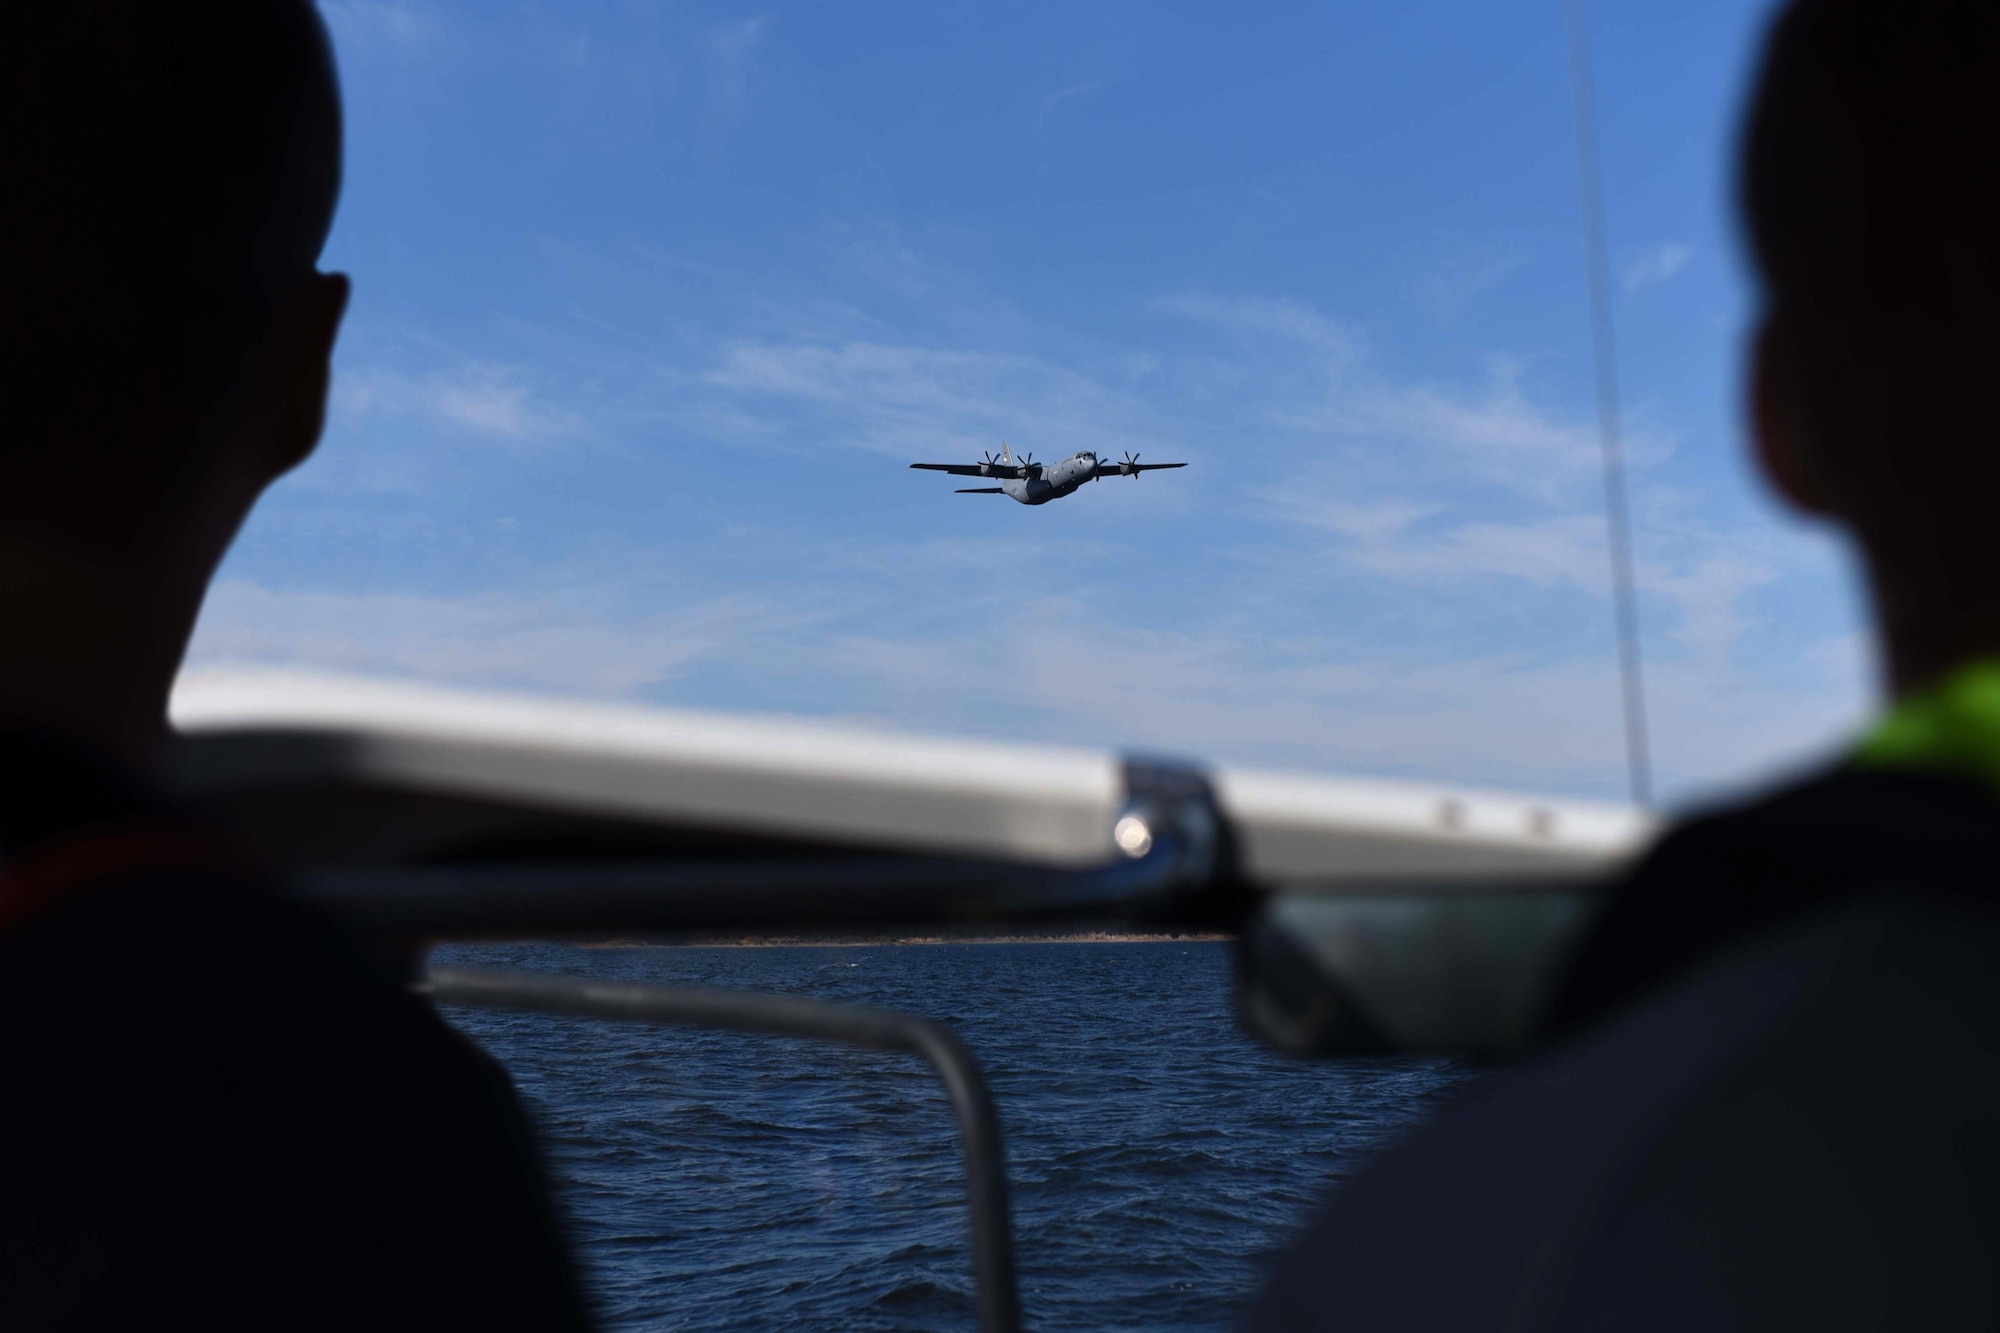 A C-130J assigned to the 19th Airlift Wing locates a capsized row boat on the water as part of a search and rescue excerise during a Turkey Shoot competition Nov. 17, 2016, at Lake Oauchita, Ark. The first objective was to locate the boat, then air drop supplies to the survivors on the water. (U.S. Air Force photo by Airman 1st Class Kevin Sommer Giron)